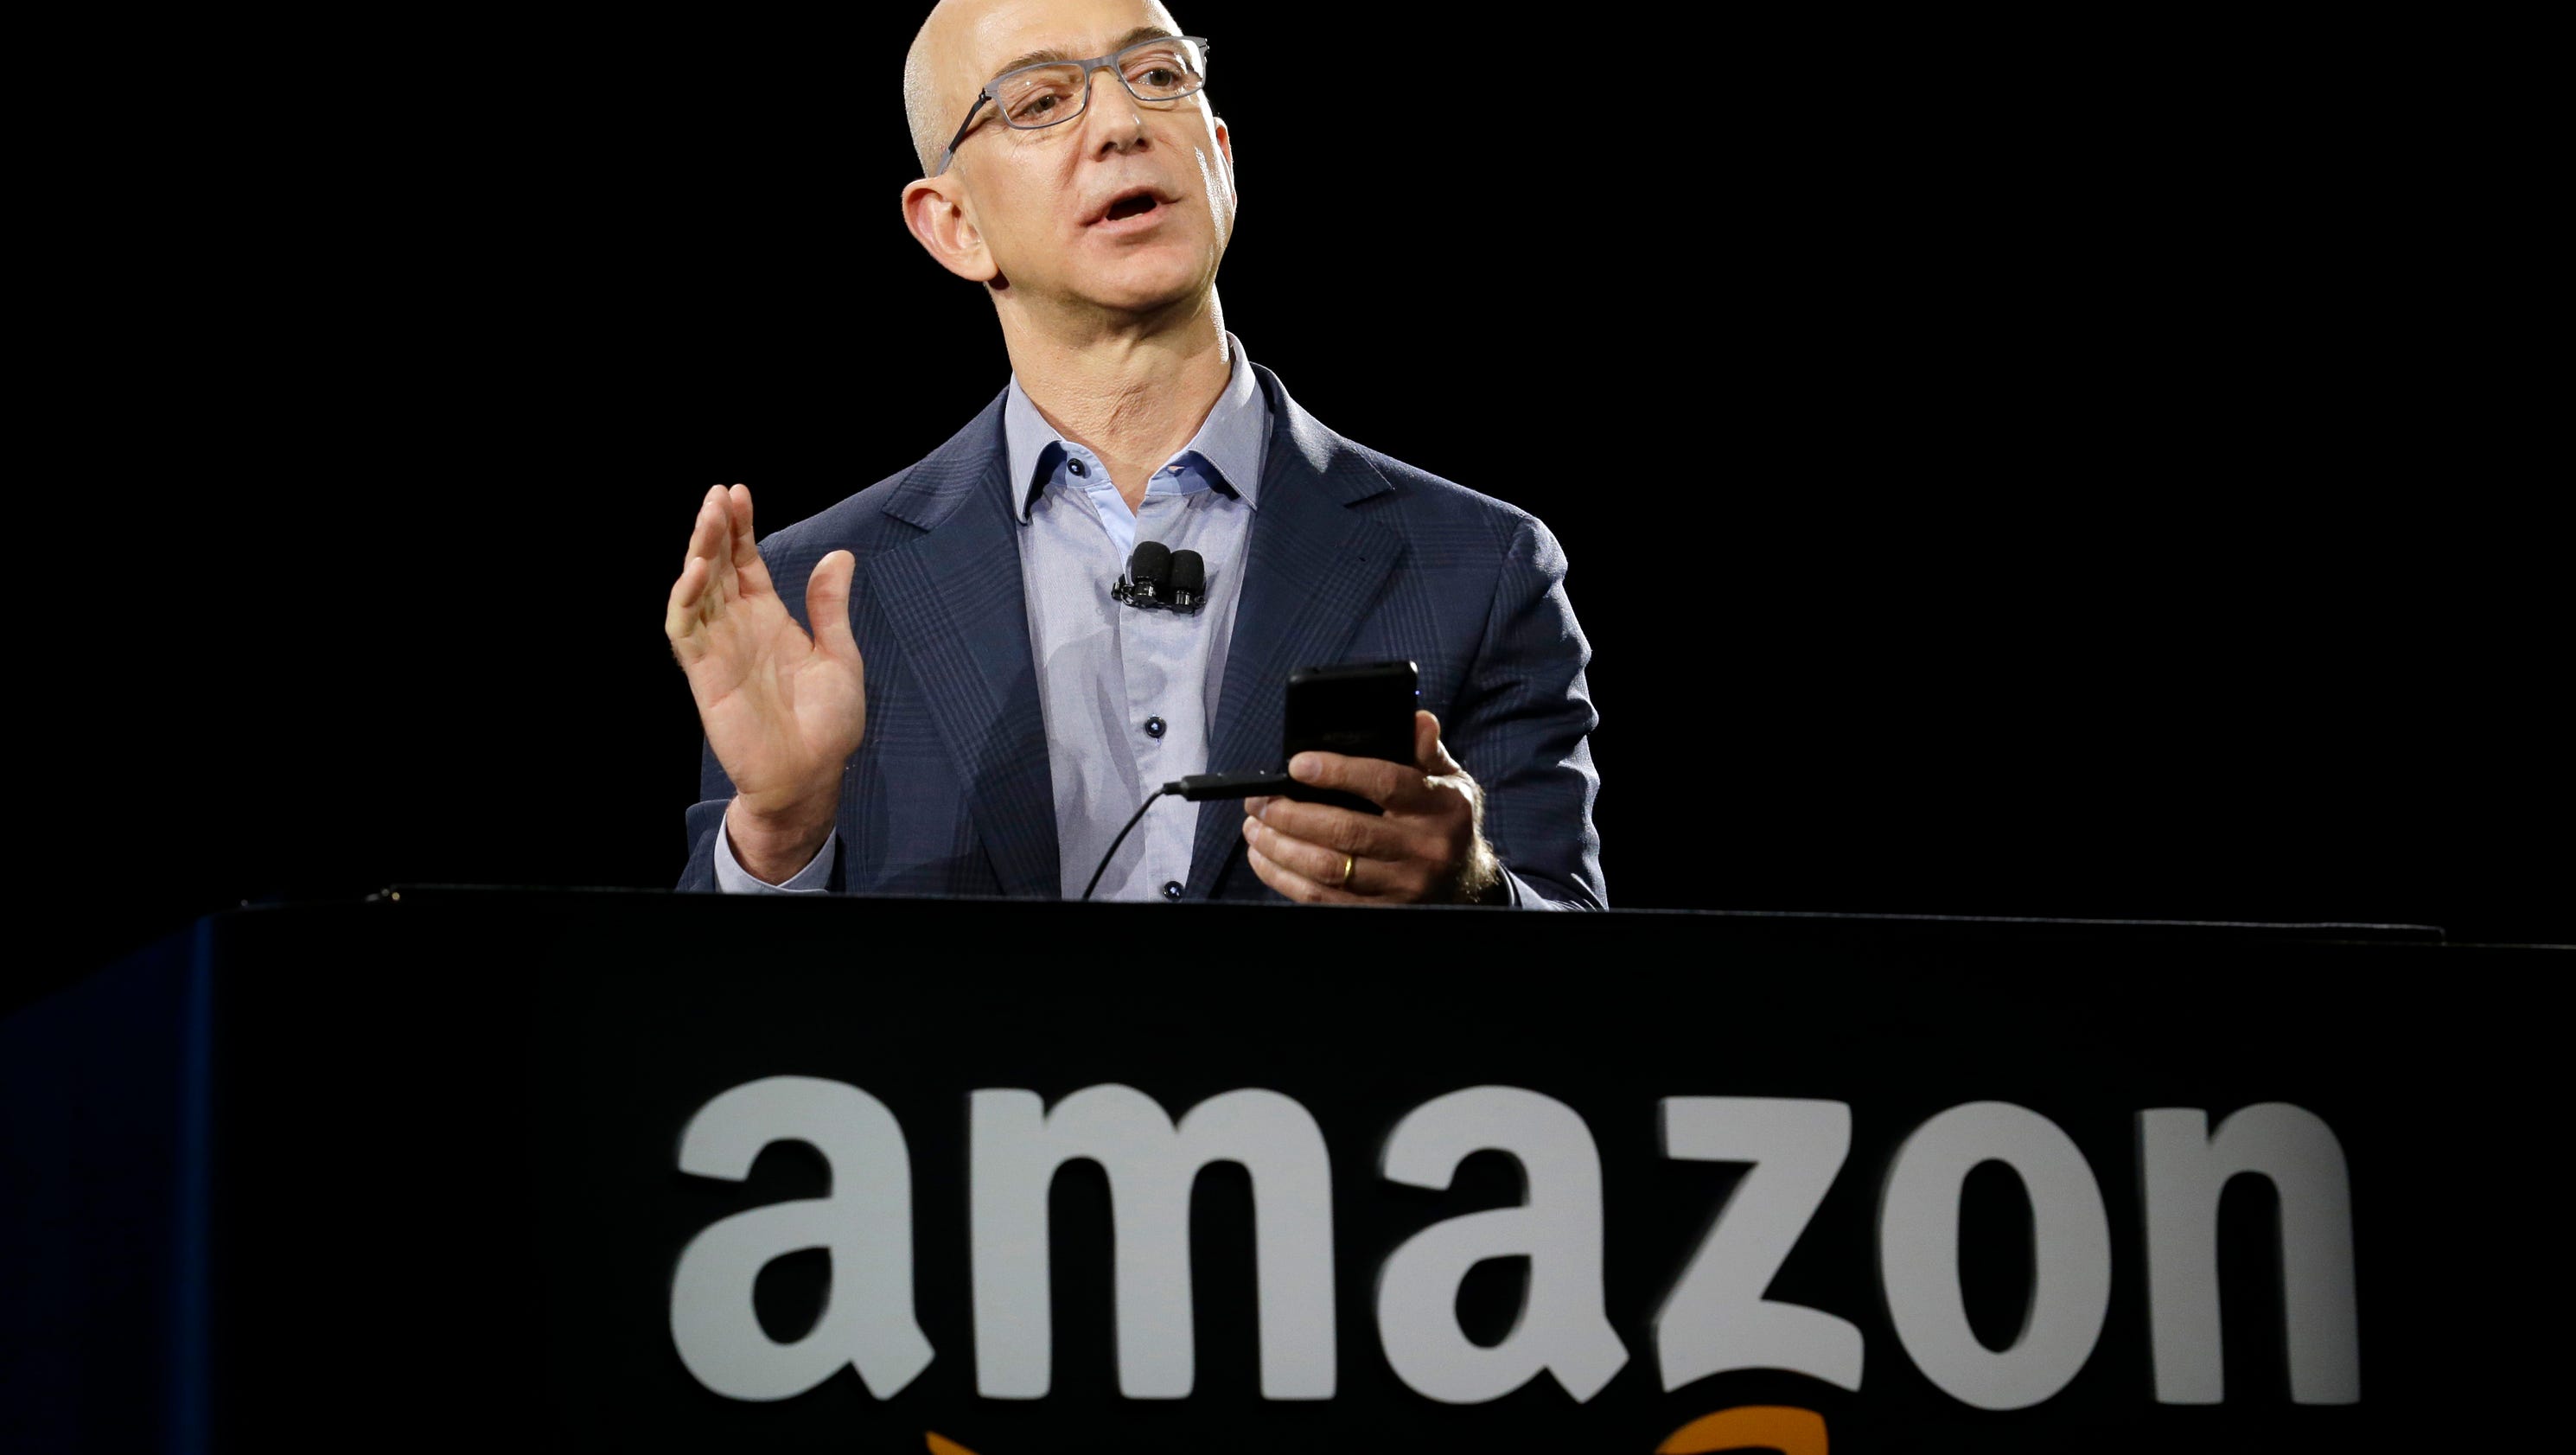 Amazon to add second headquarters with up to 50,000 jobs